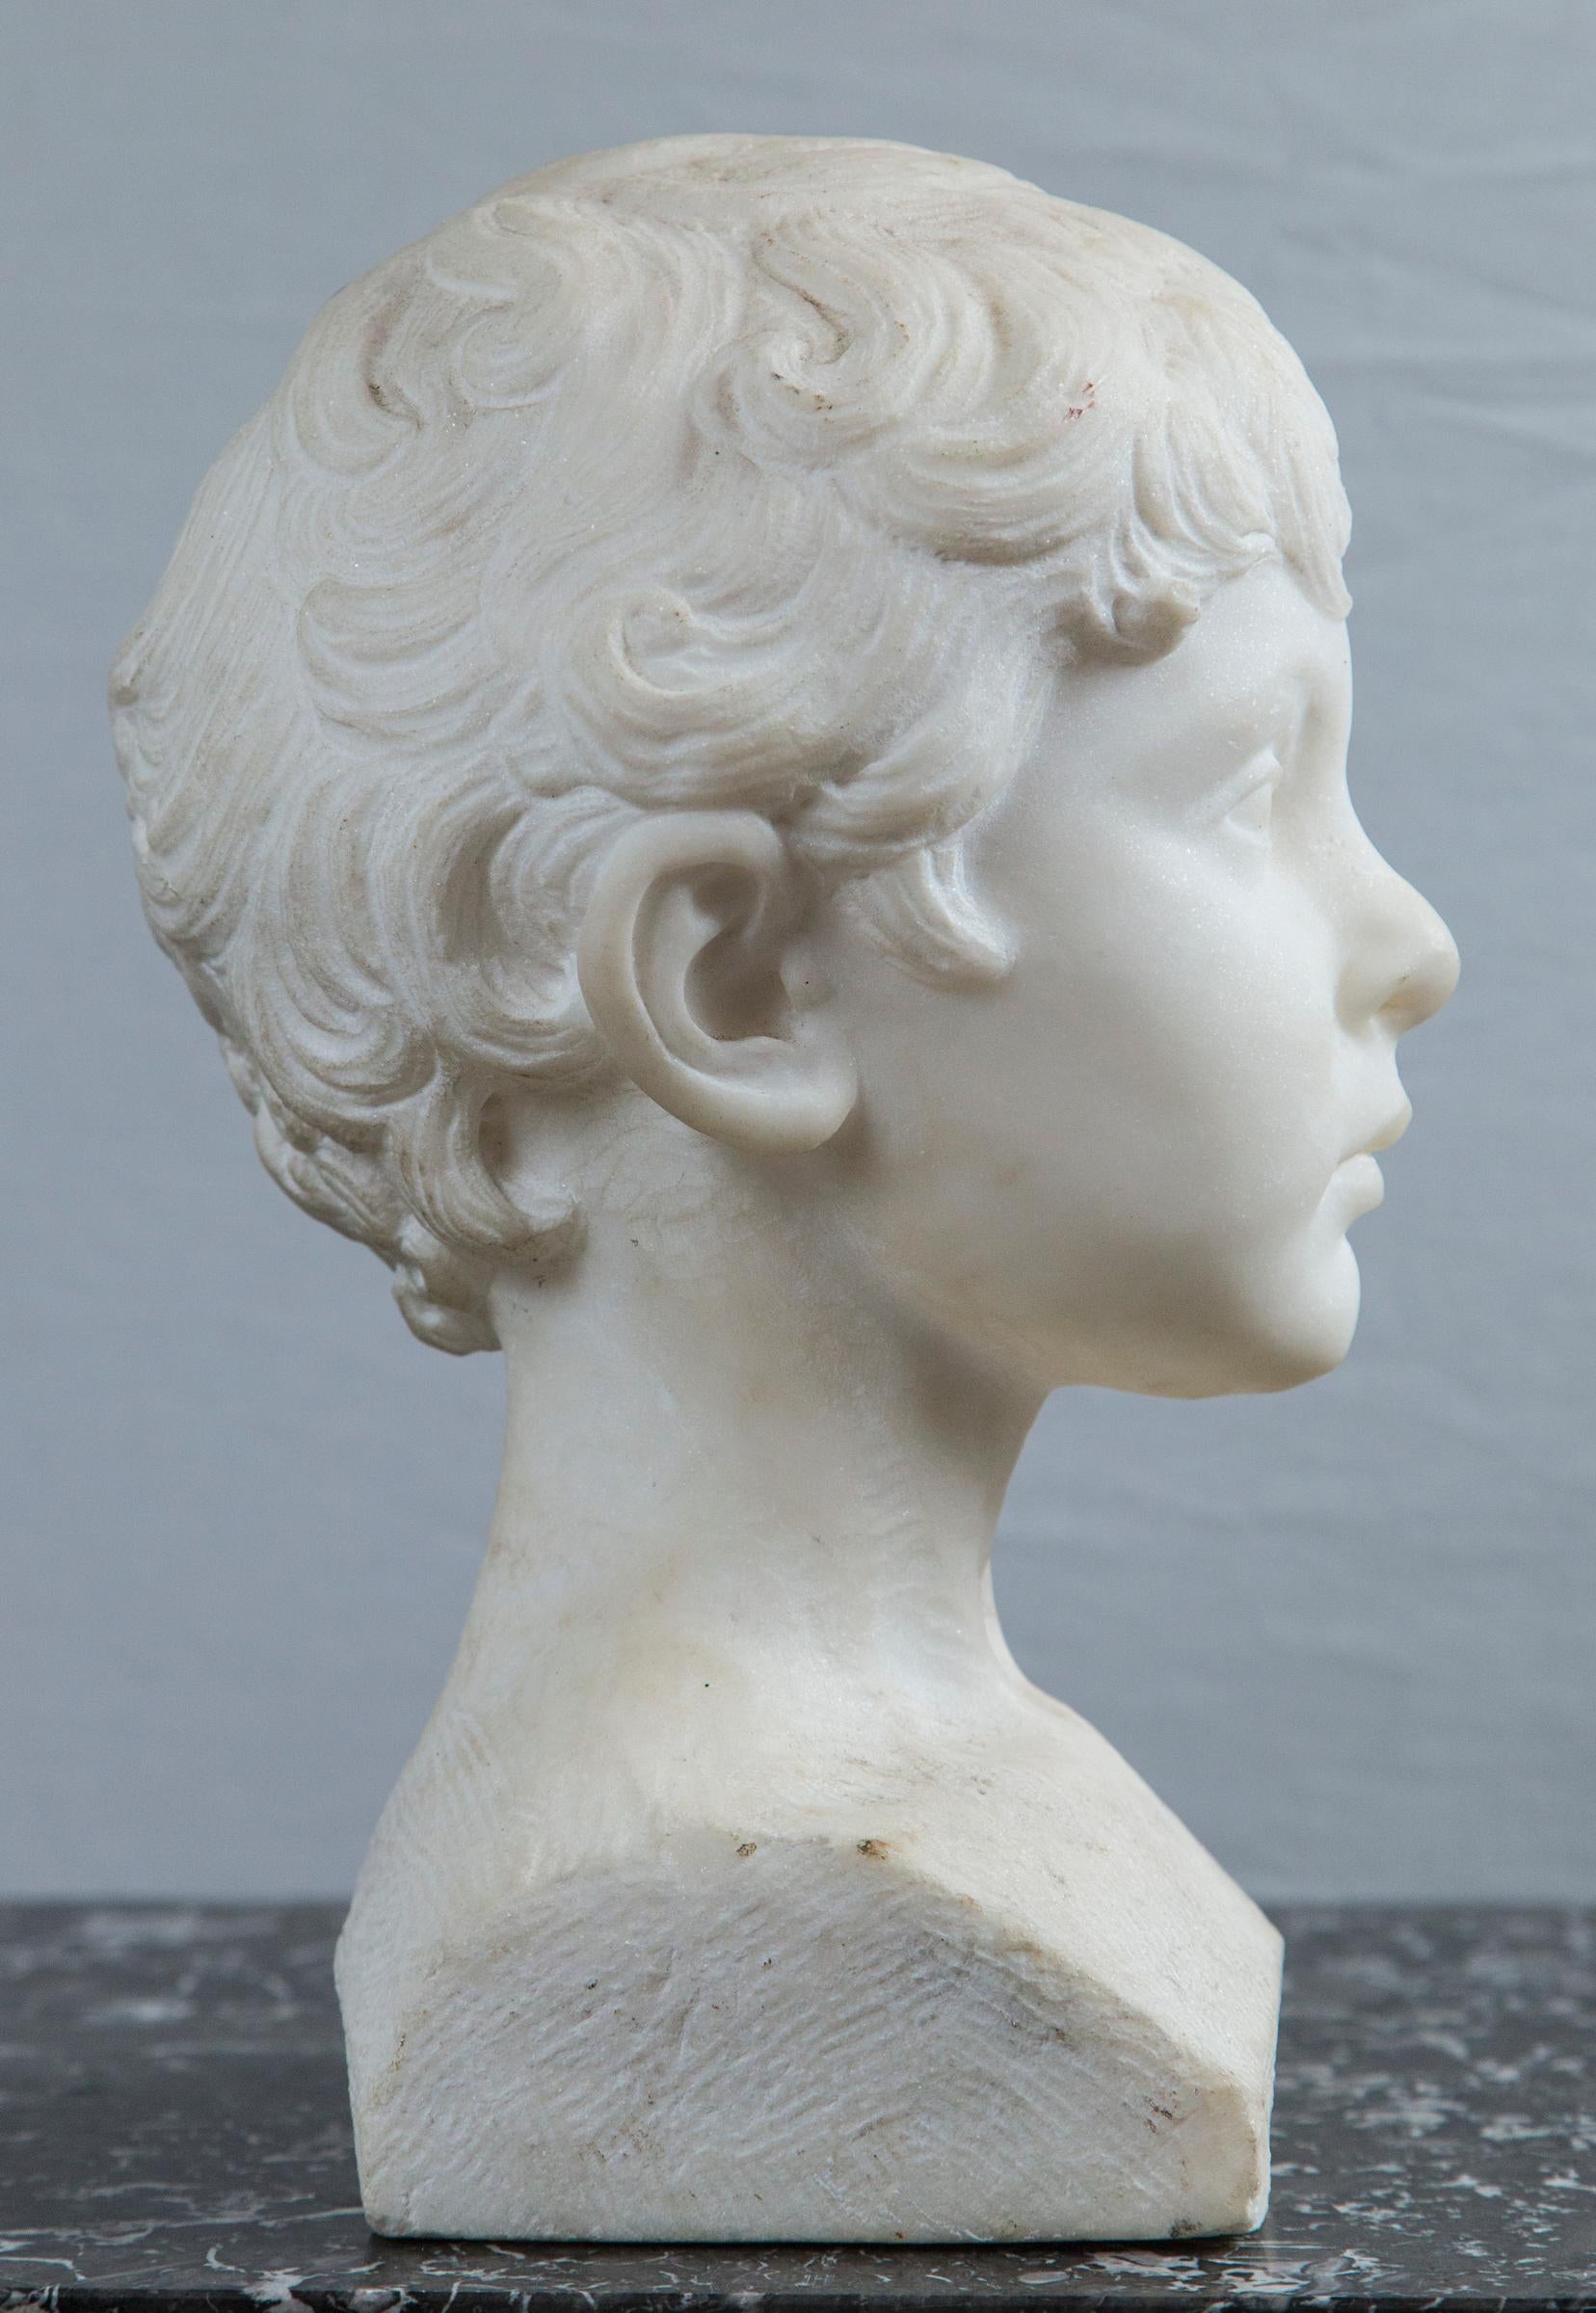 19th Century White Marble Bust of a Young Boy